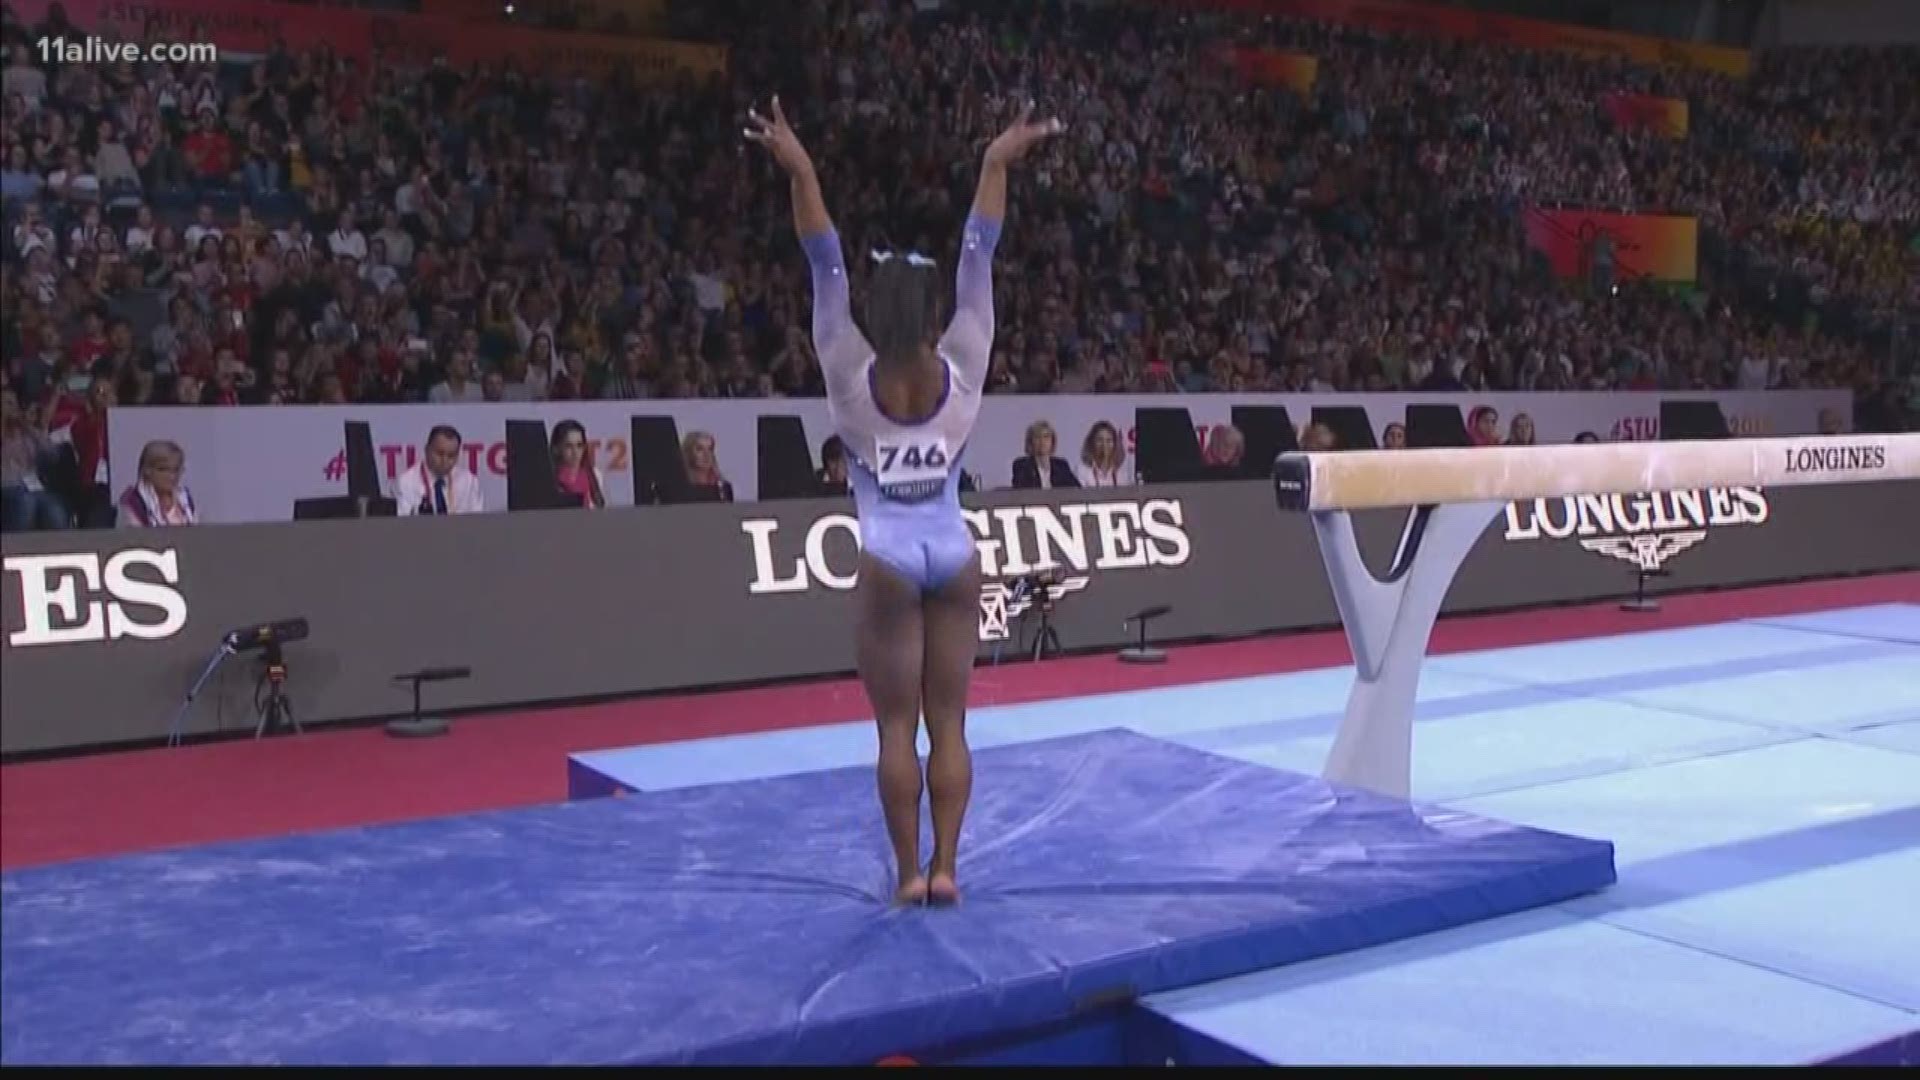 Here's why some gymnastics fans are upset with how officials are scoring the moves.